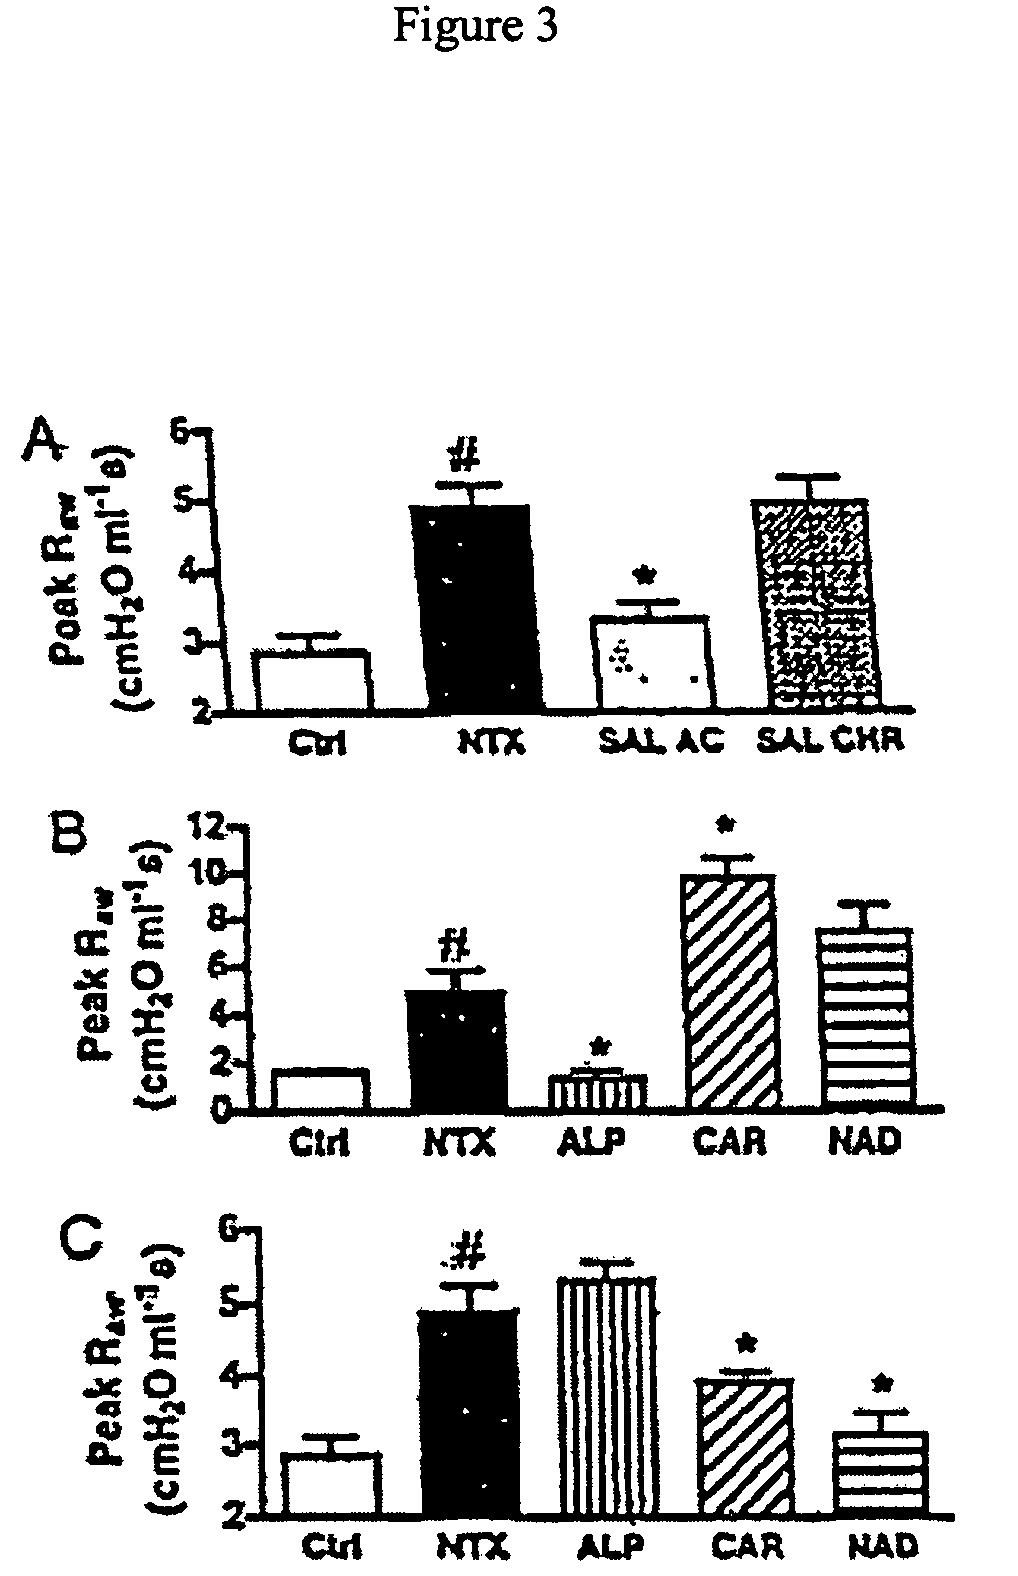 Method of treating airway diseases with beta-adrenergic inverse agonists